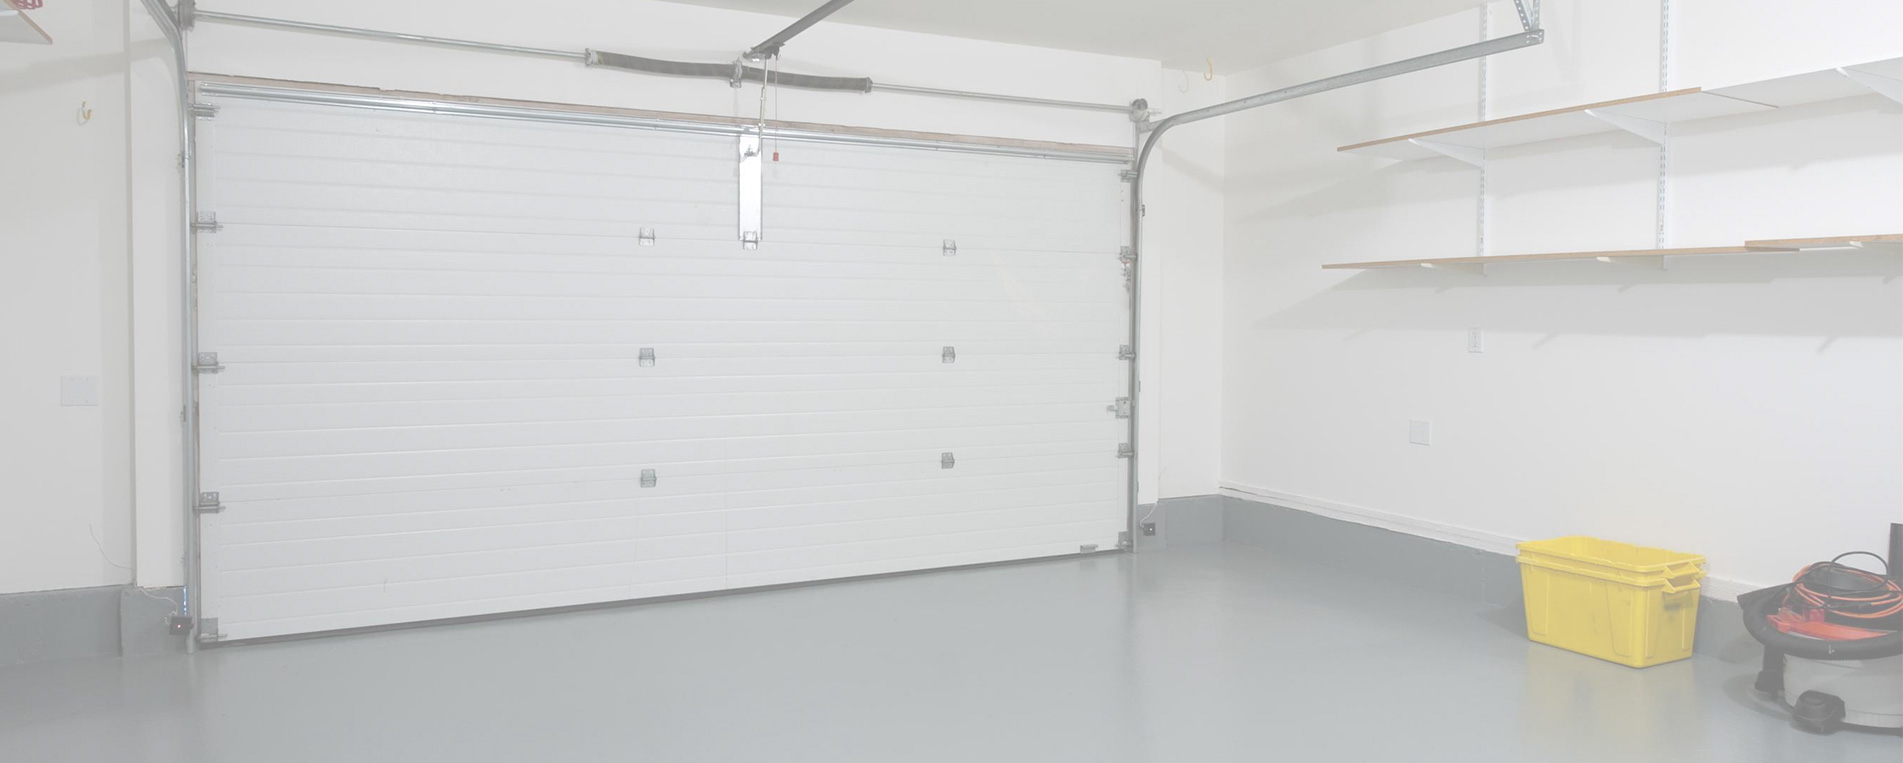 Why the Doors of Your Garage Won’t Close?